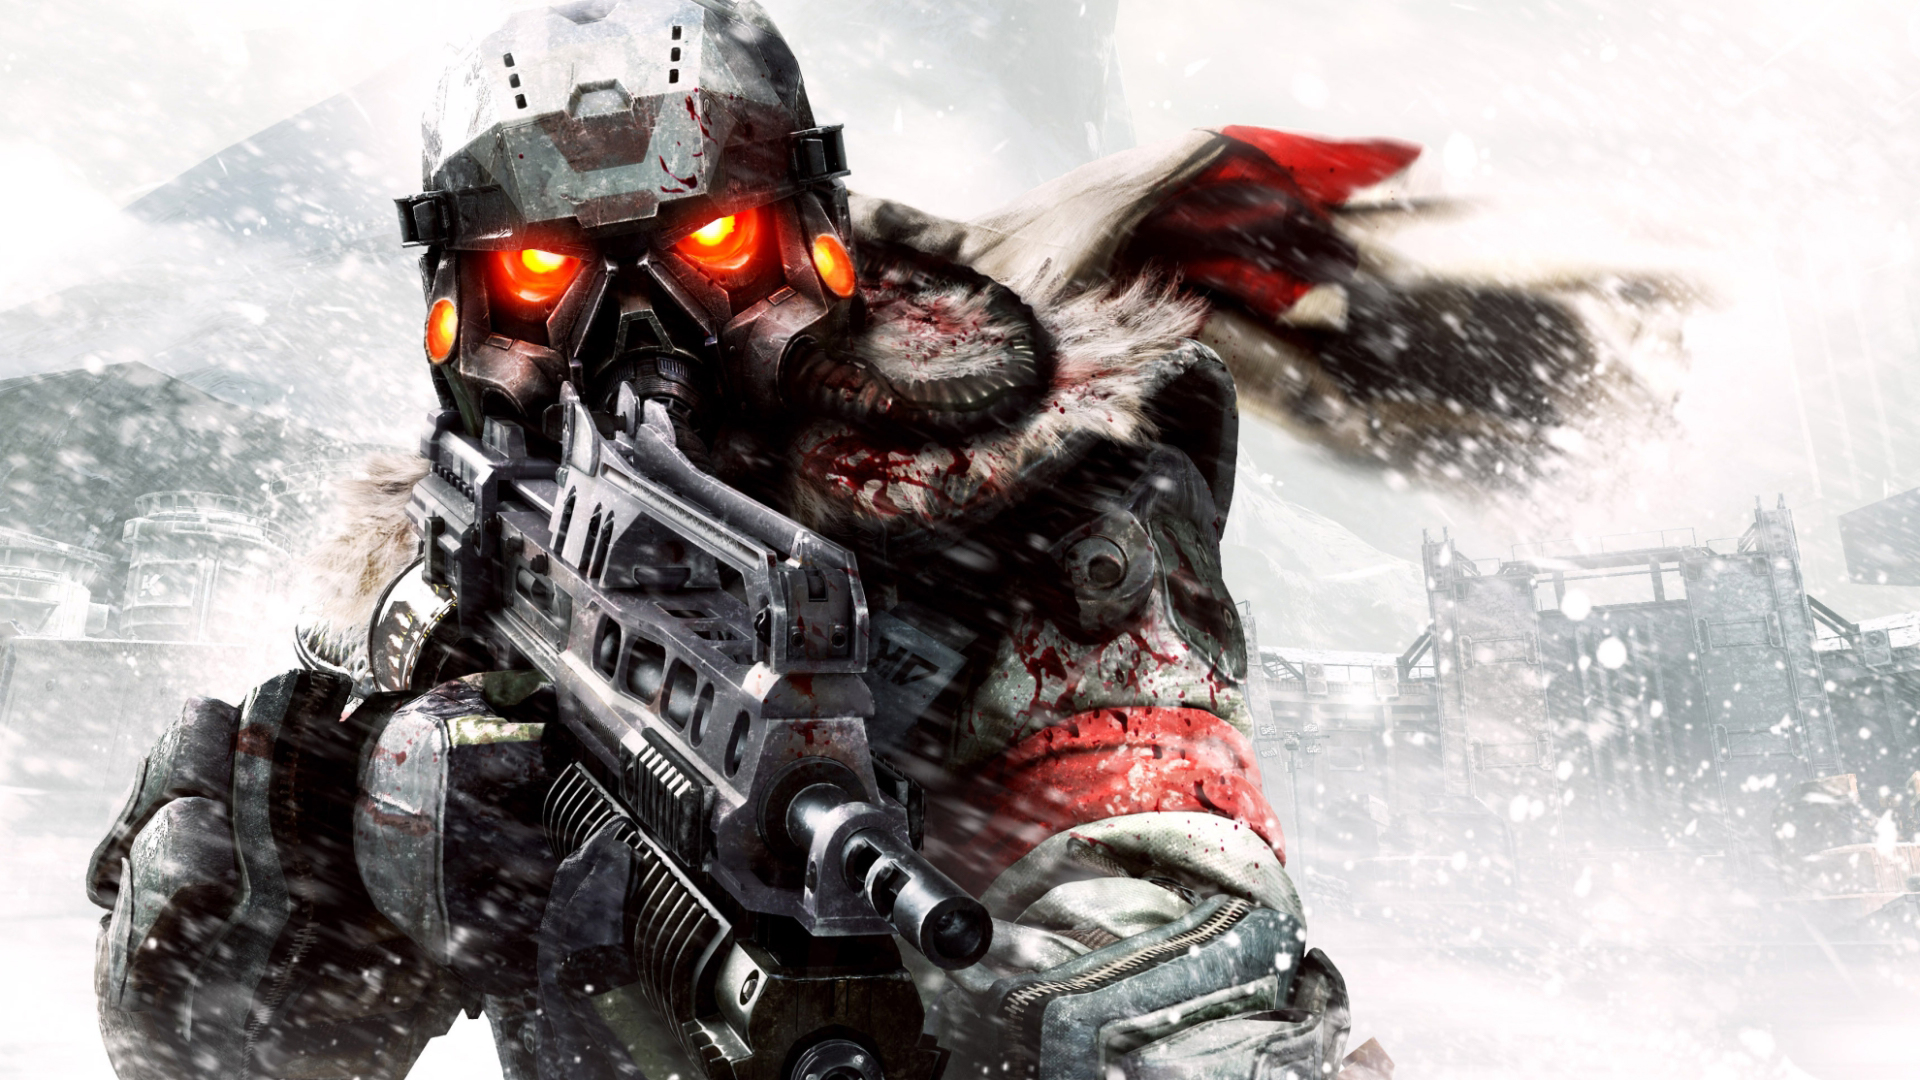 Petition · Please, Guerilla Games, bring back Killzone 2 with